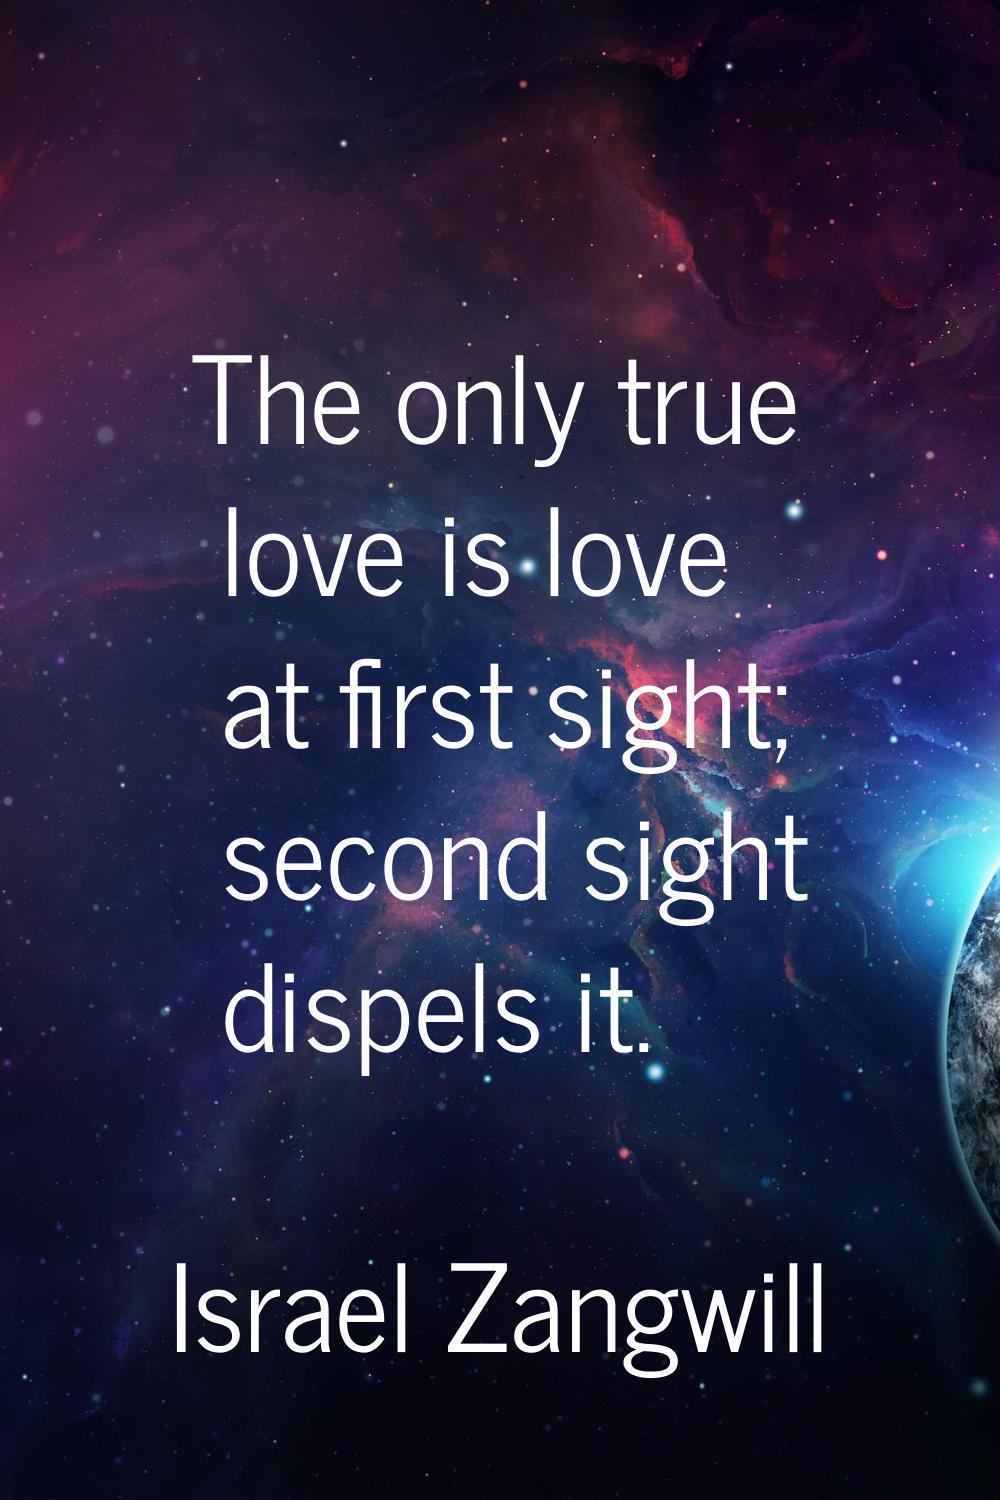 The only true love is love at first sight; second sight dispels it.